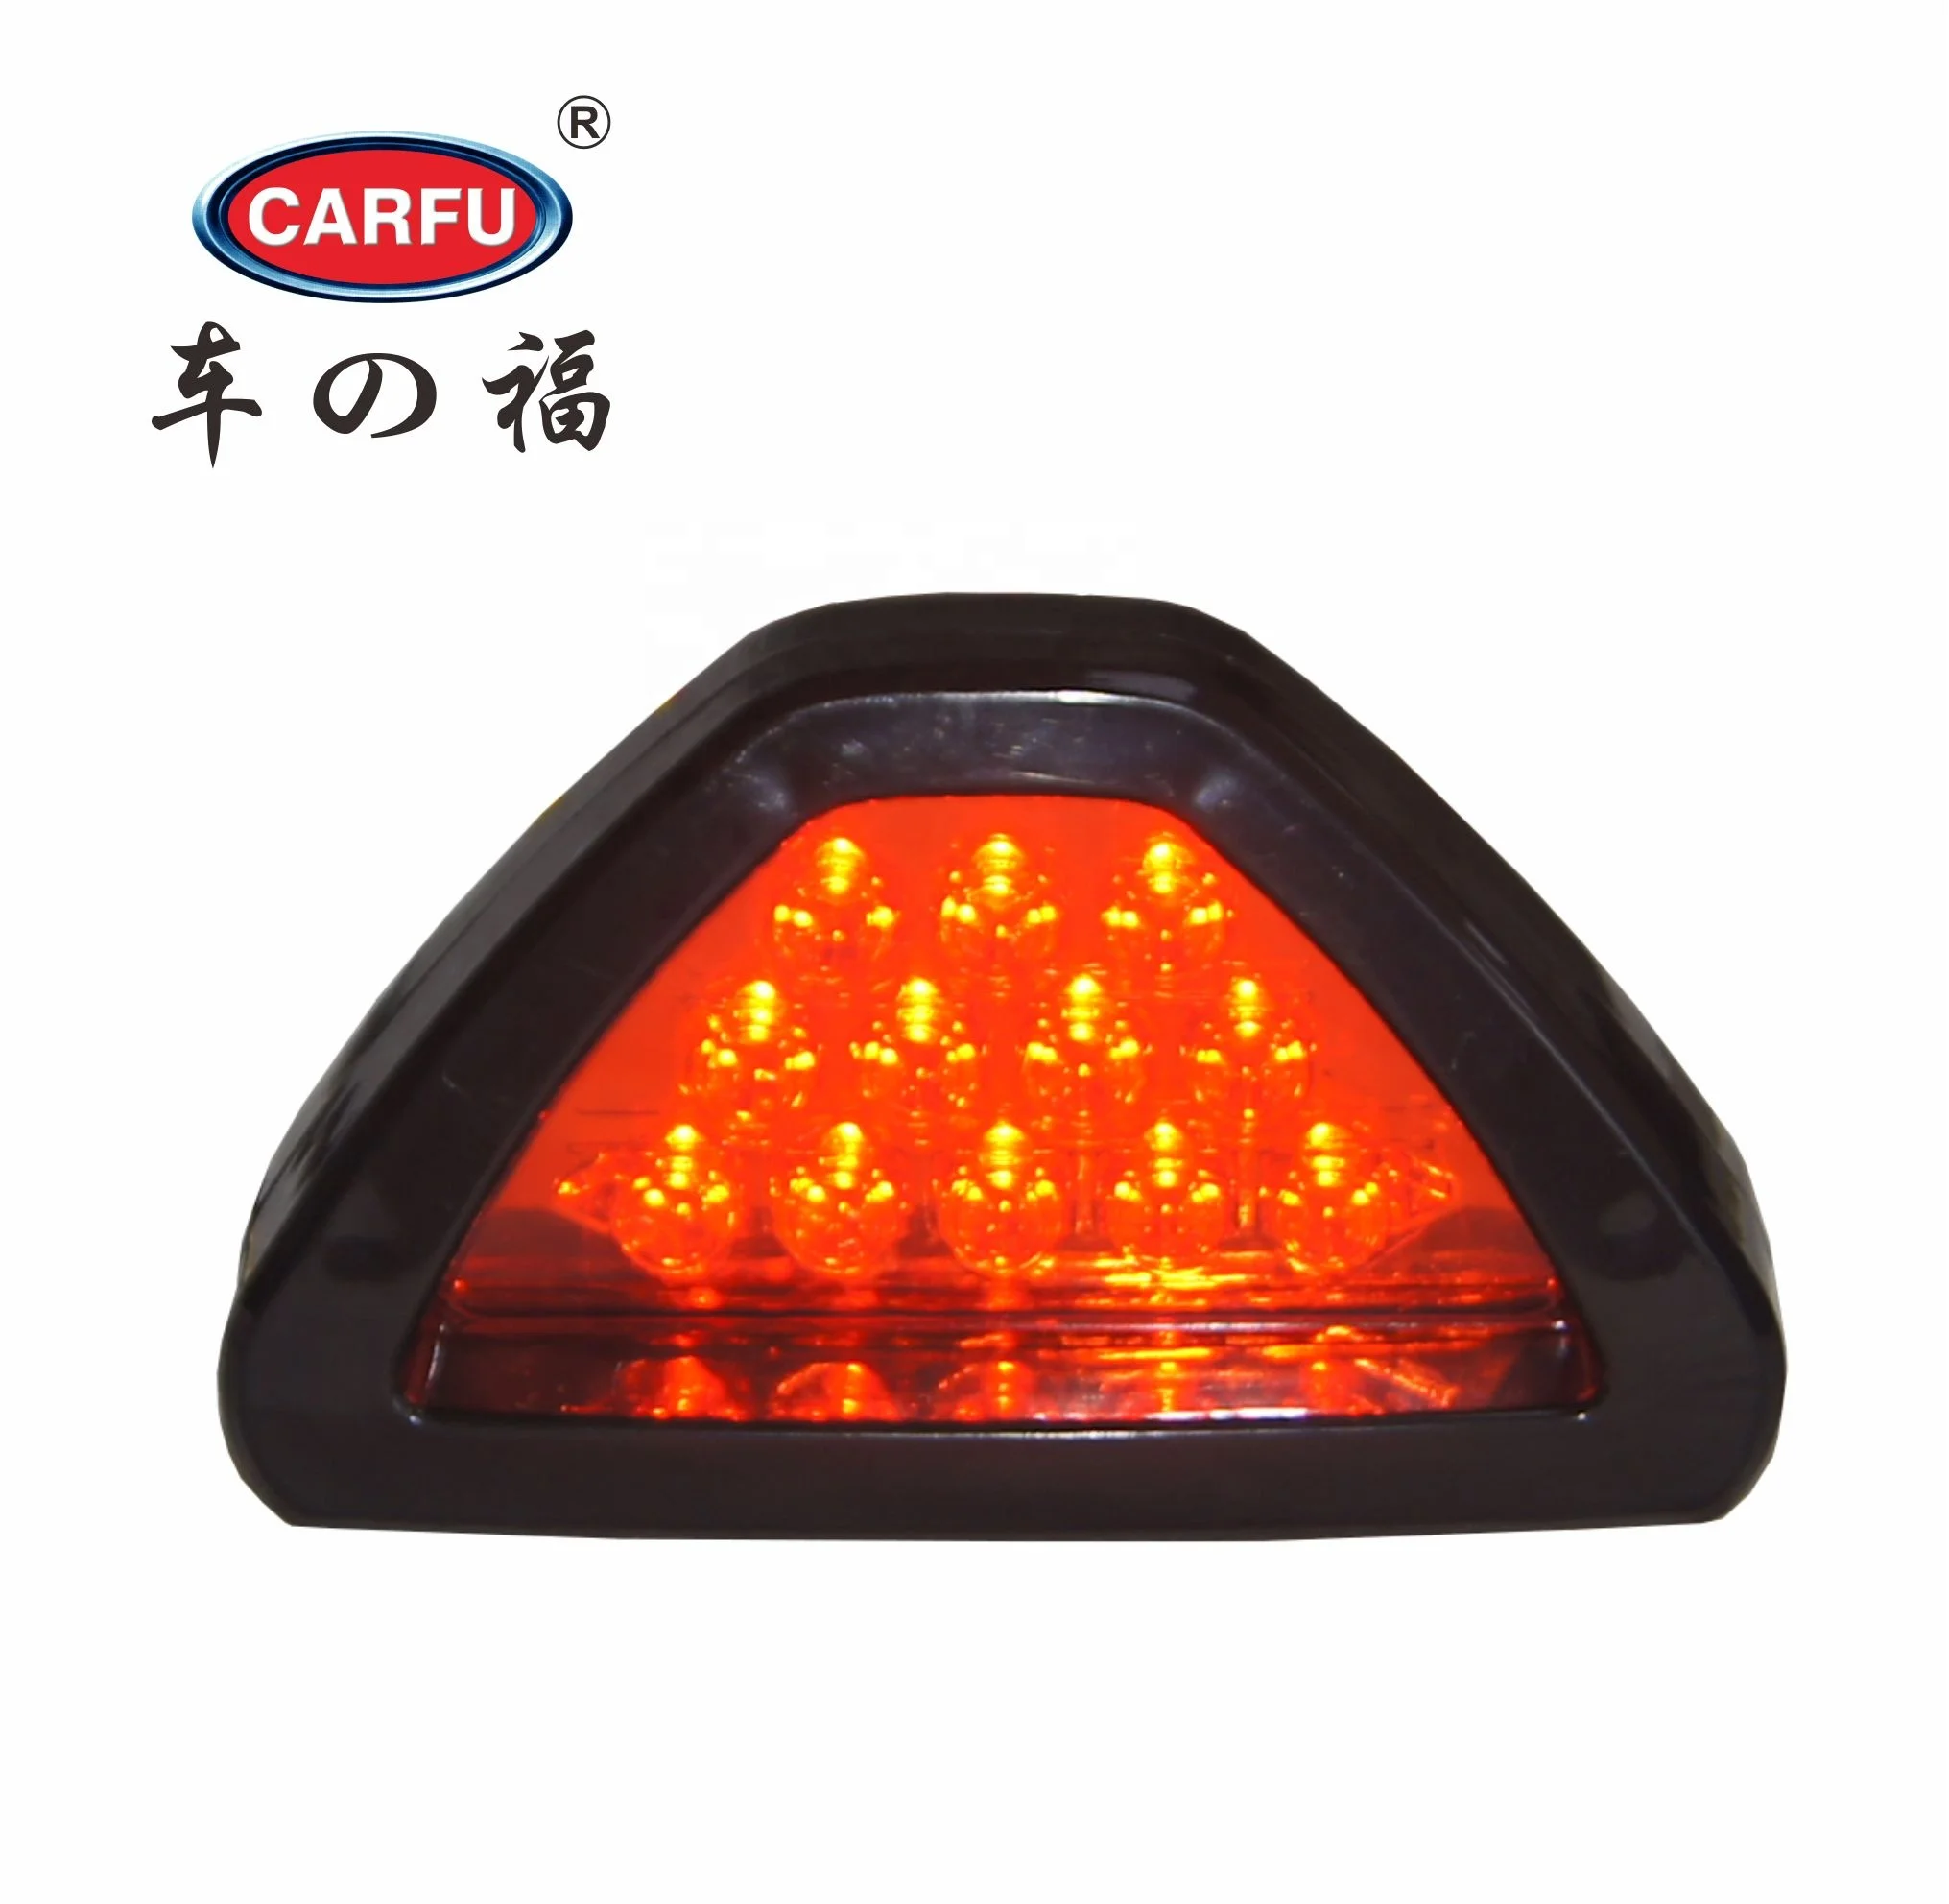 2020 Newest wholesale car decoration accessories ONE-STOP OEM FACTORY over 20 years old car break light